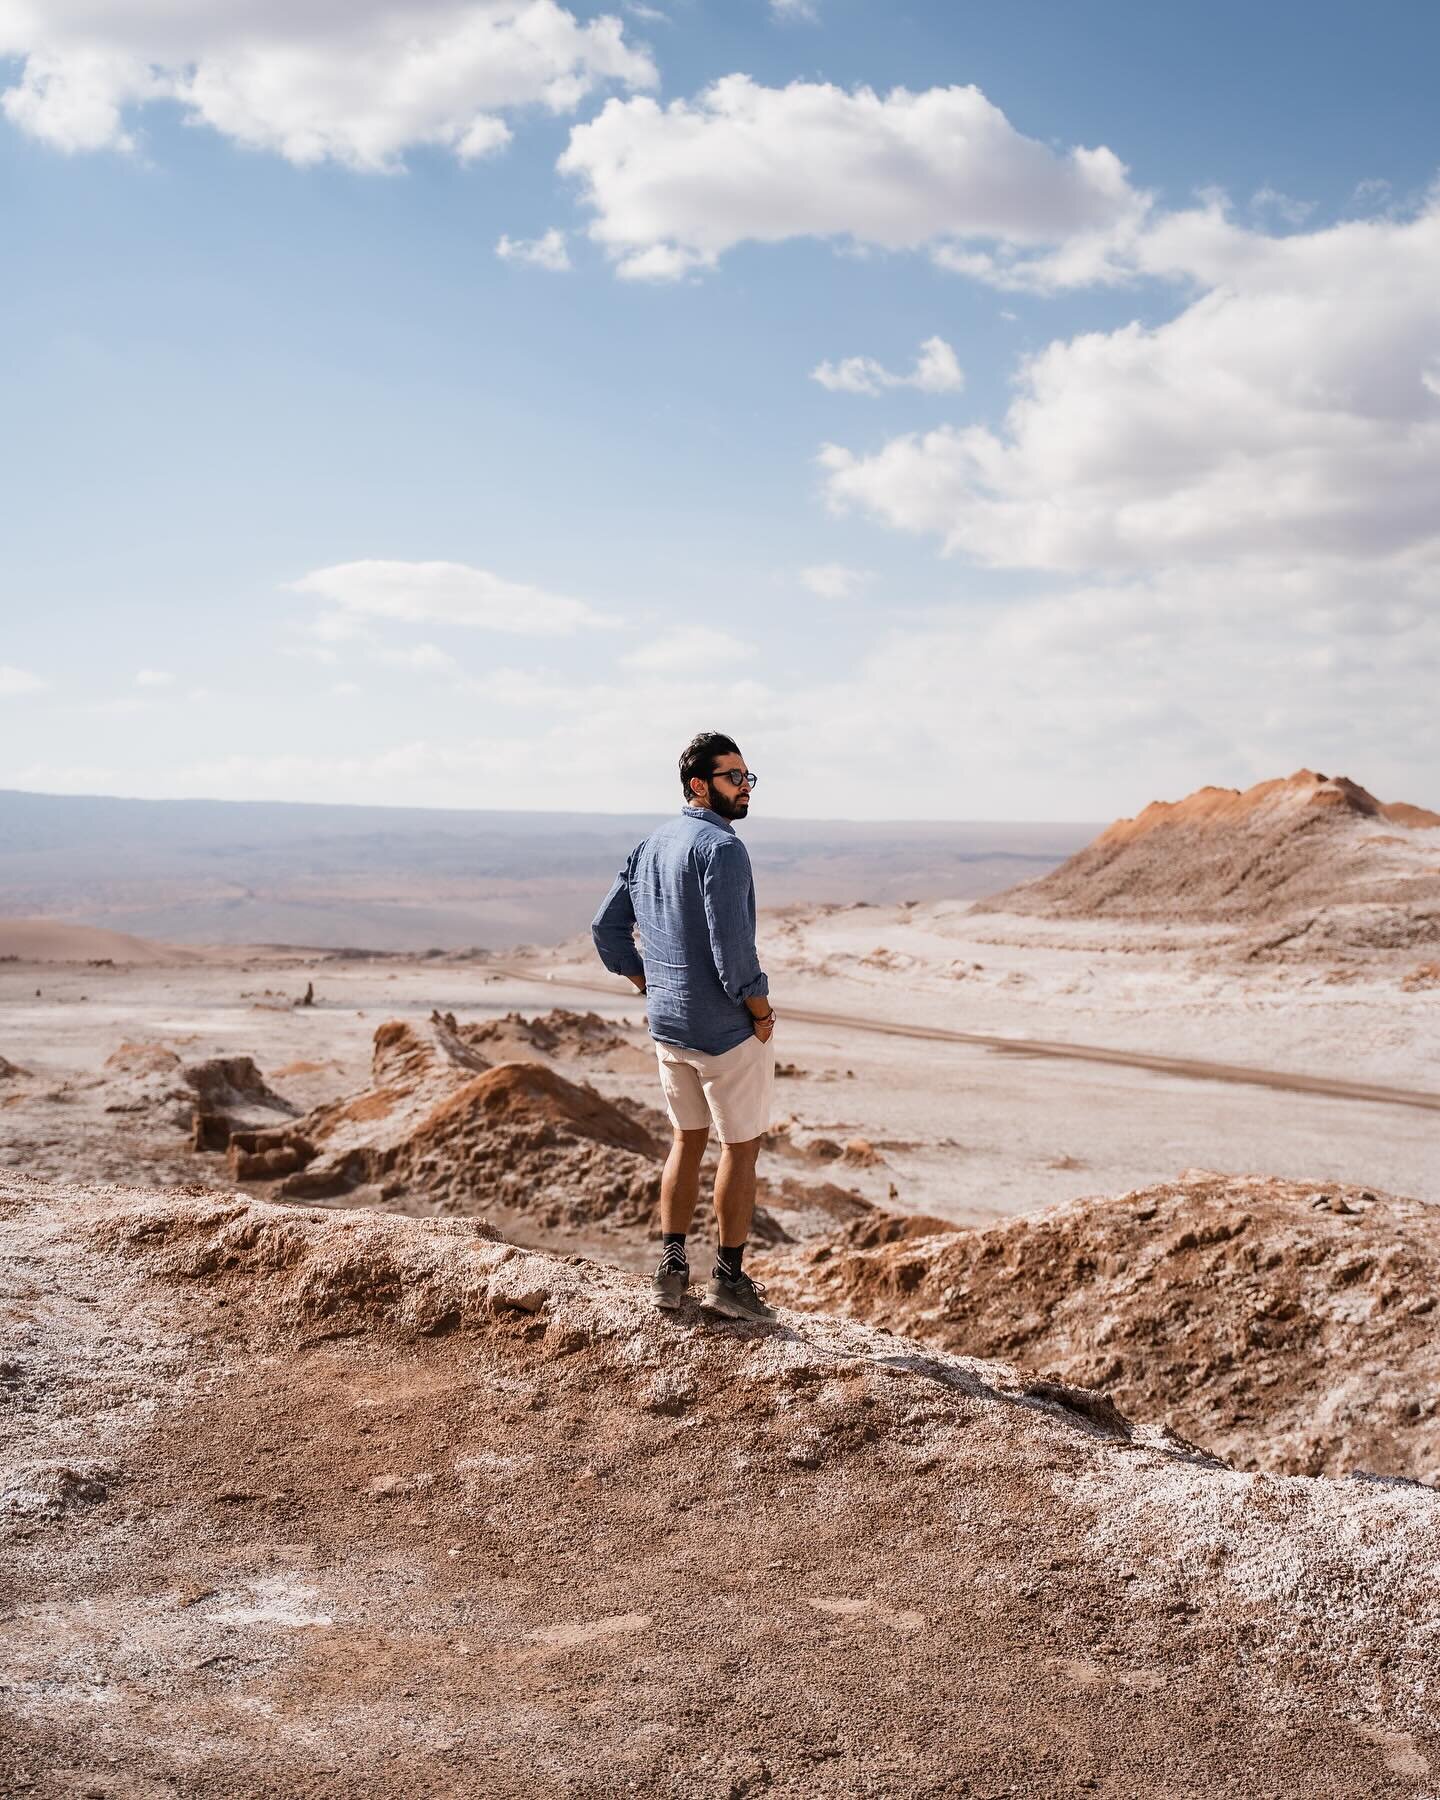 Welcome to Valle de la Luna. I&rsquo;ve not seen anything quite like it before and walked away feeling so inspired and fortunate to be able to photograph such a surreal place. Is it the moon or mars?! From dunes to rugged mountains and lagoons to cha